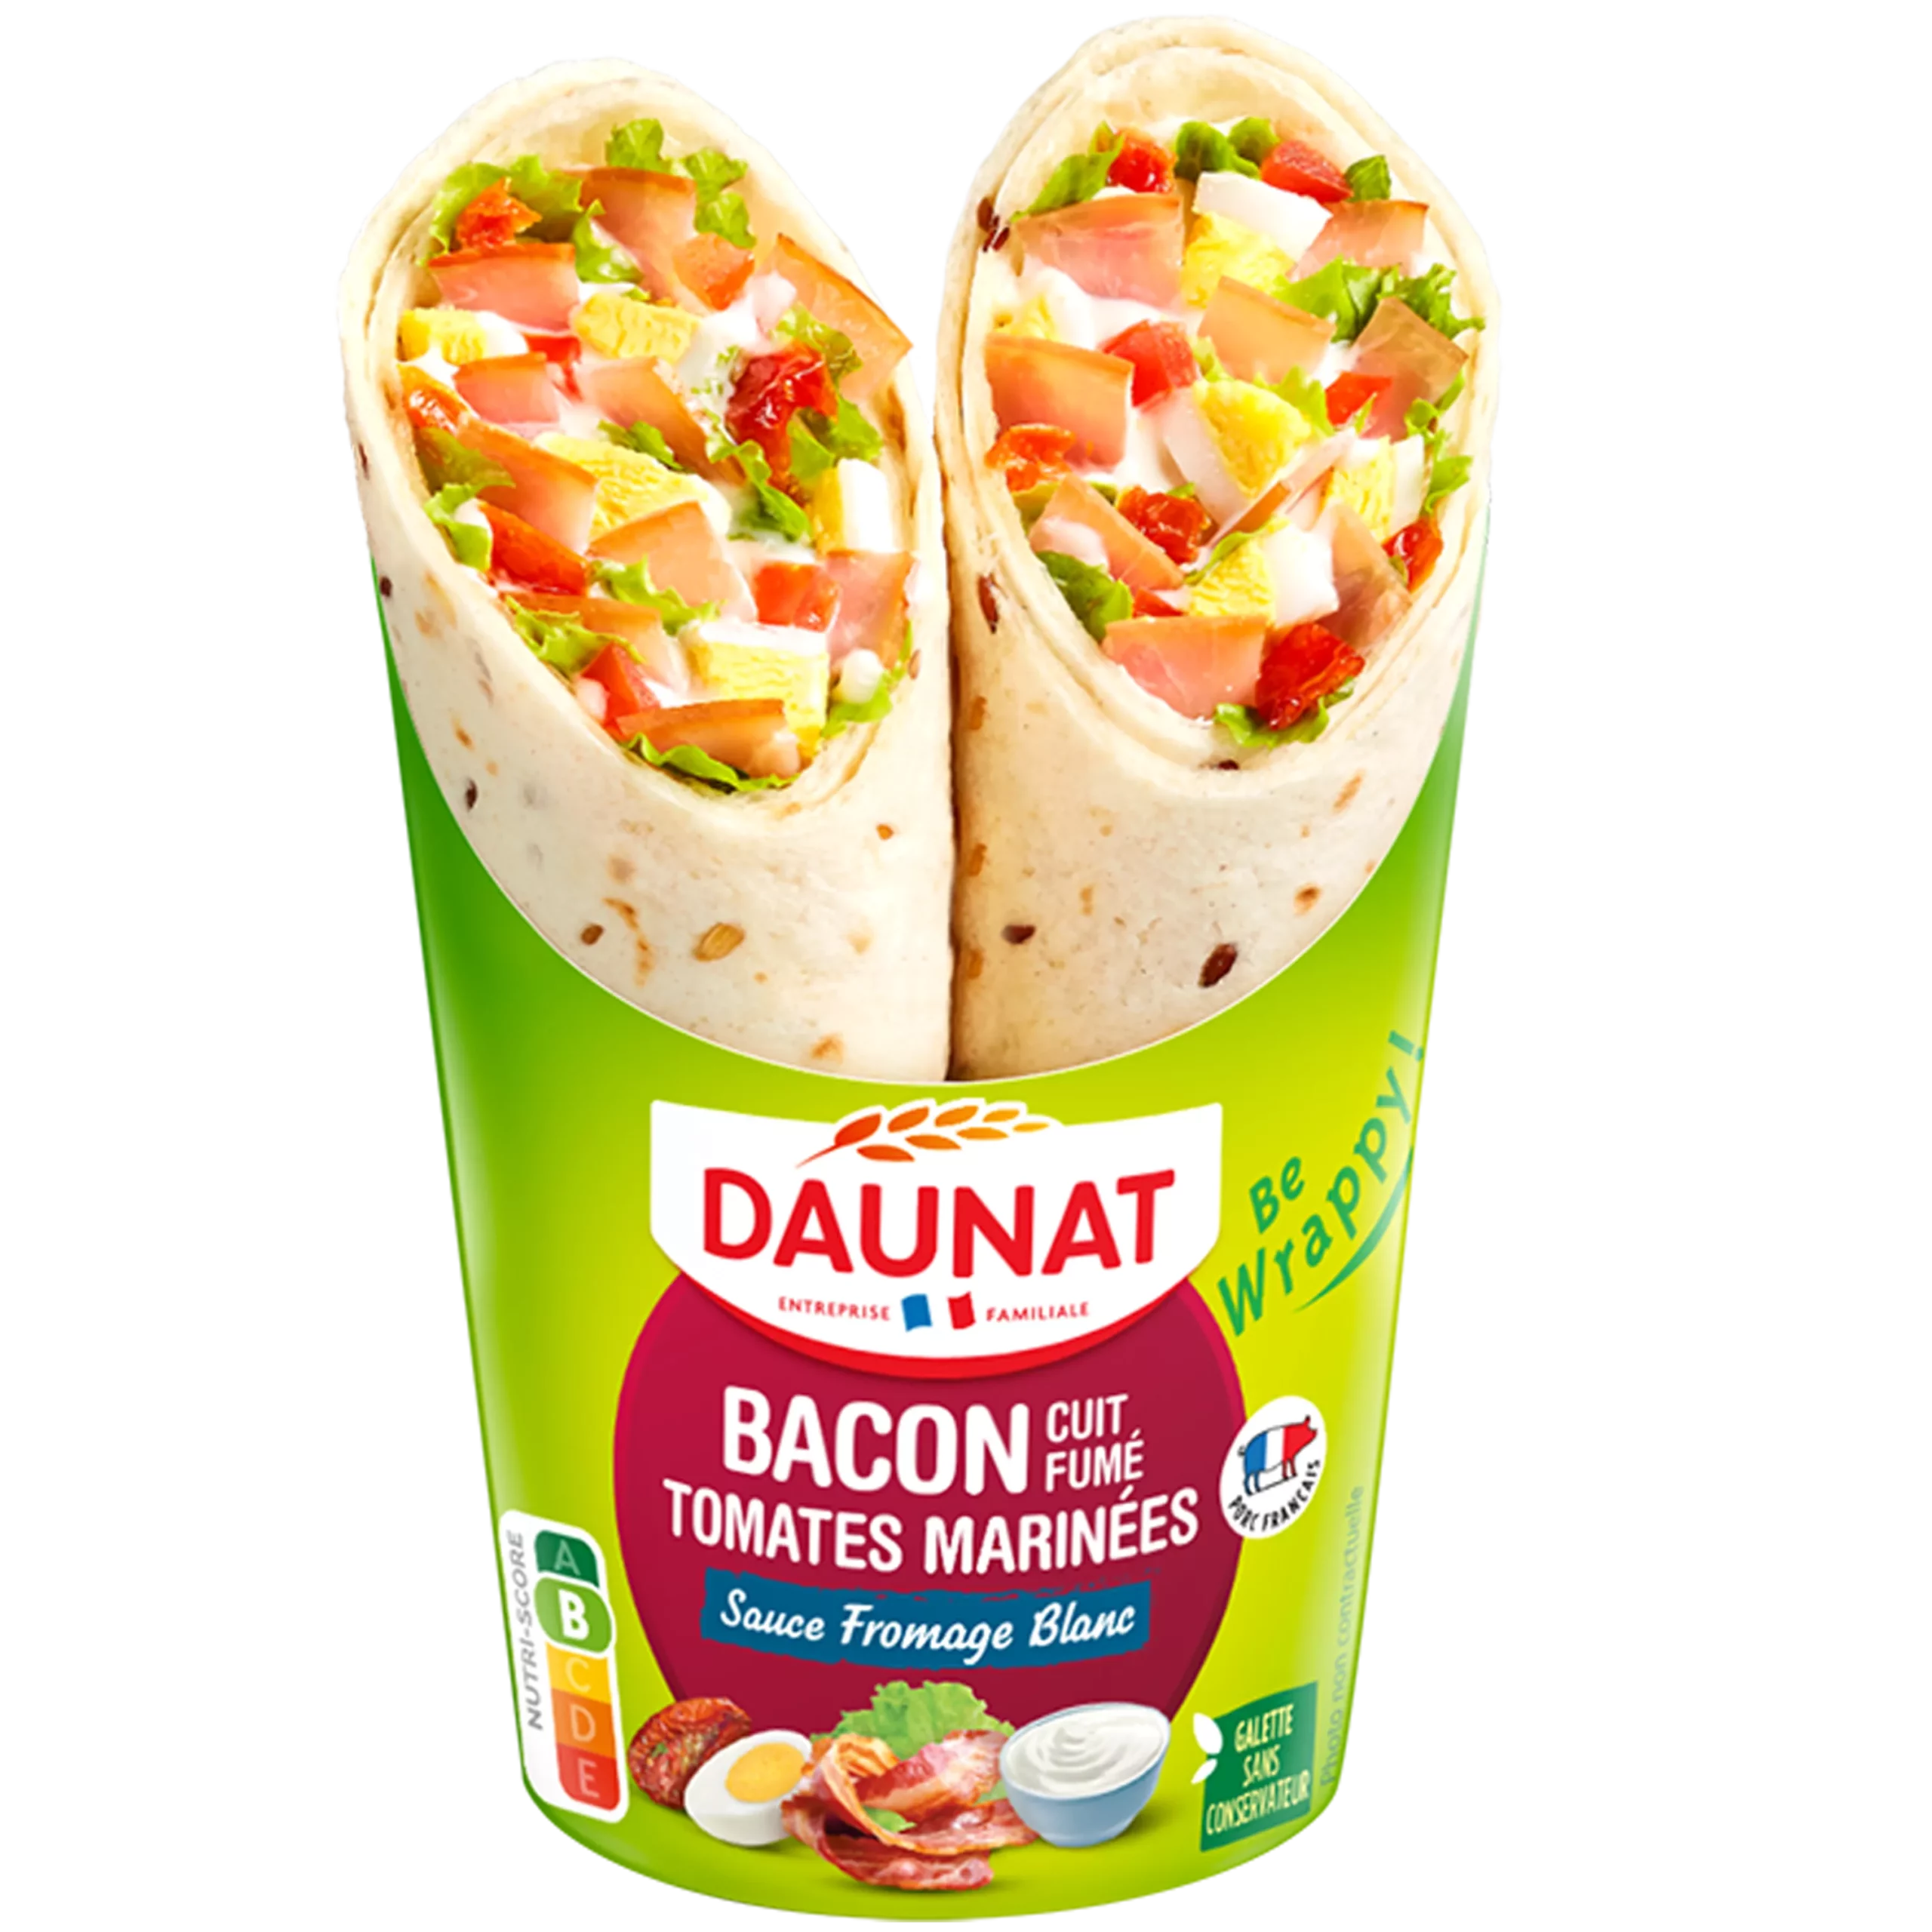 Wrap bacon grille oeuf tomate marinee et sauce yaourt190G